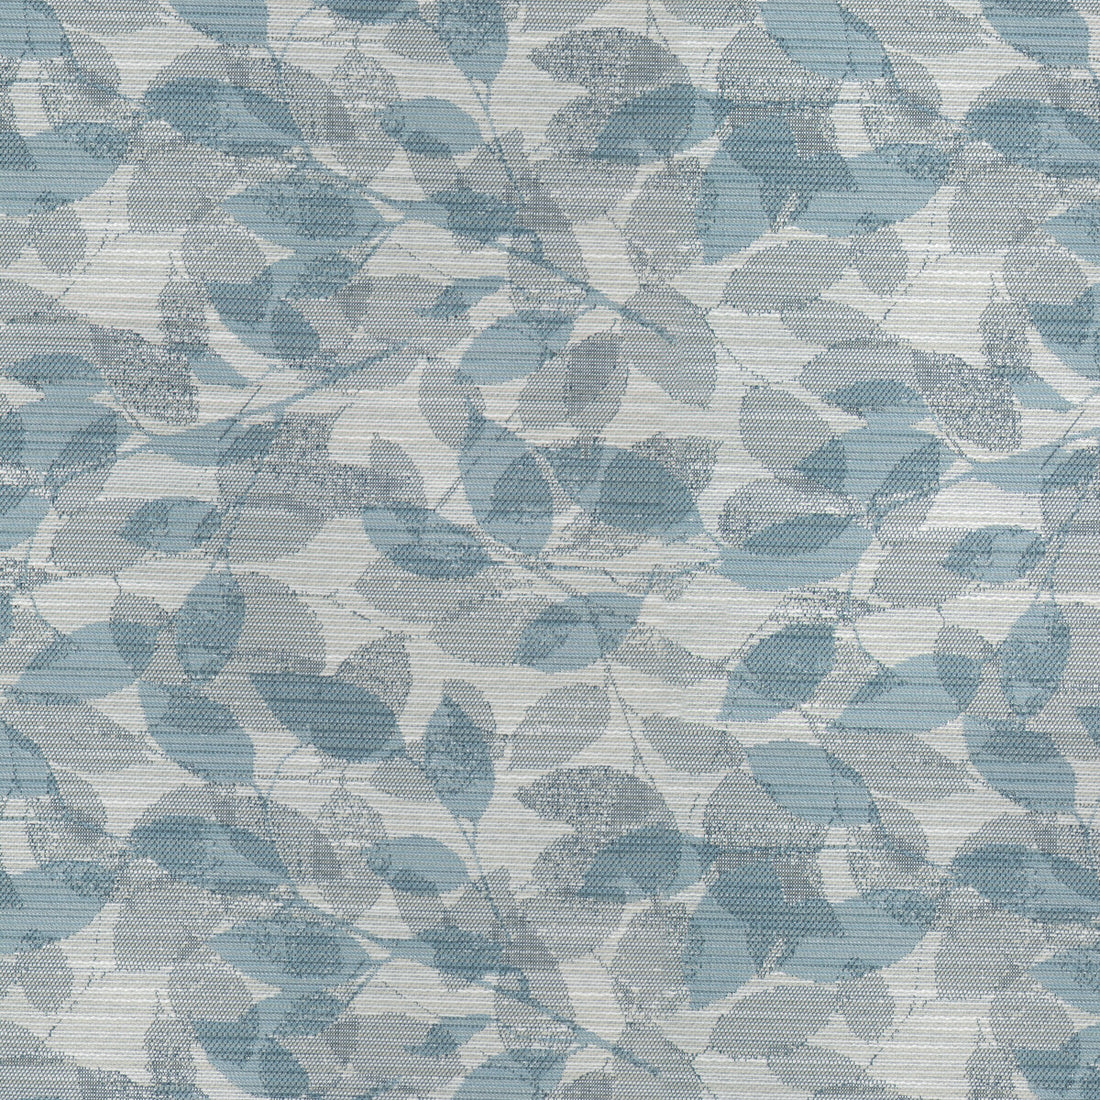 Leaf Dance fabric in sky color - pattern 37053.1516.0 - by Kravet Contract in the Chesapeake collection